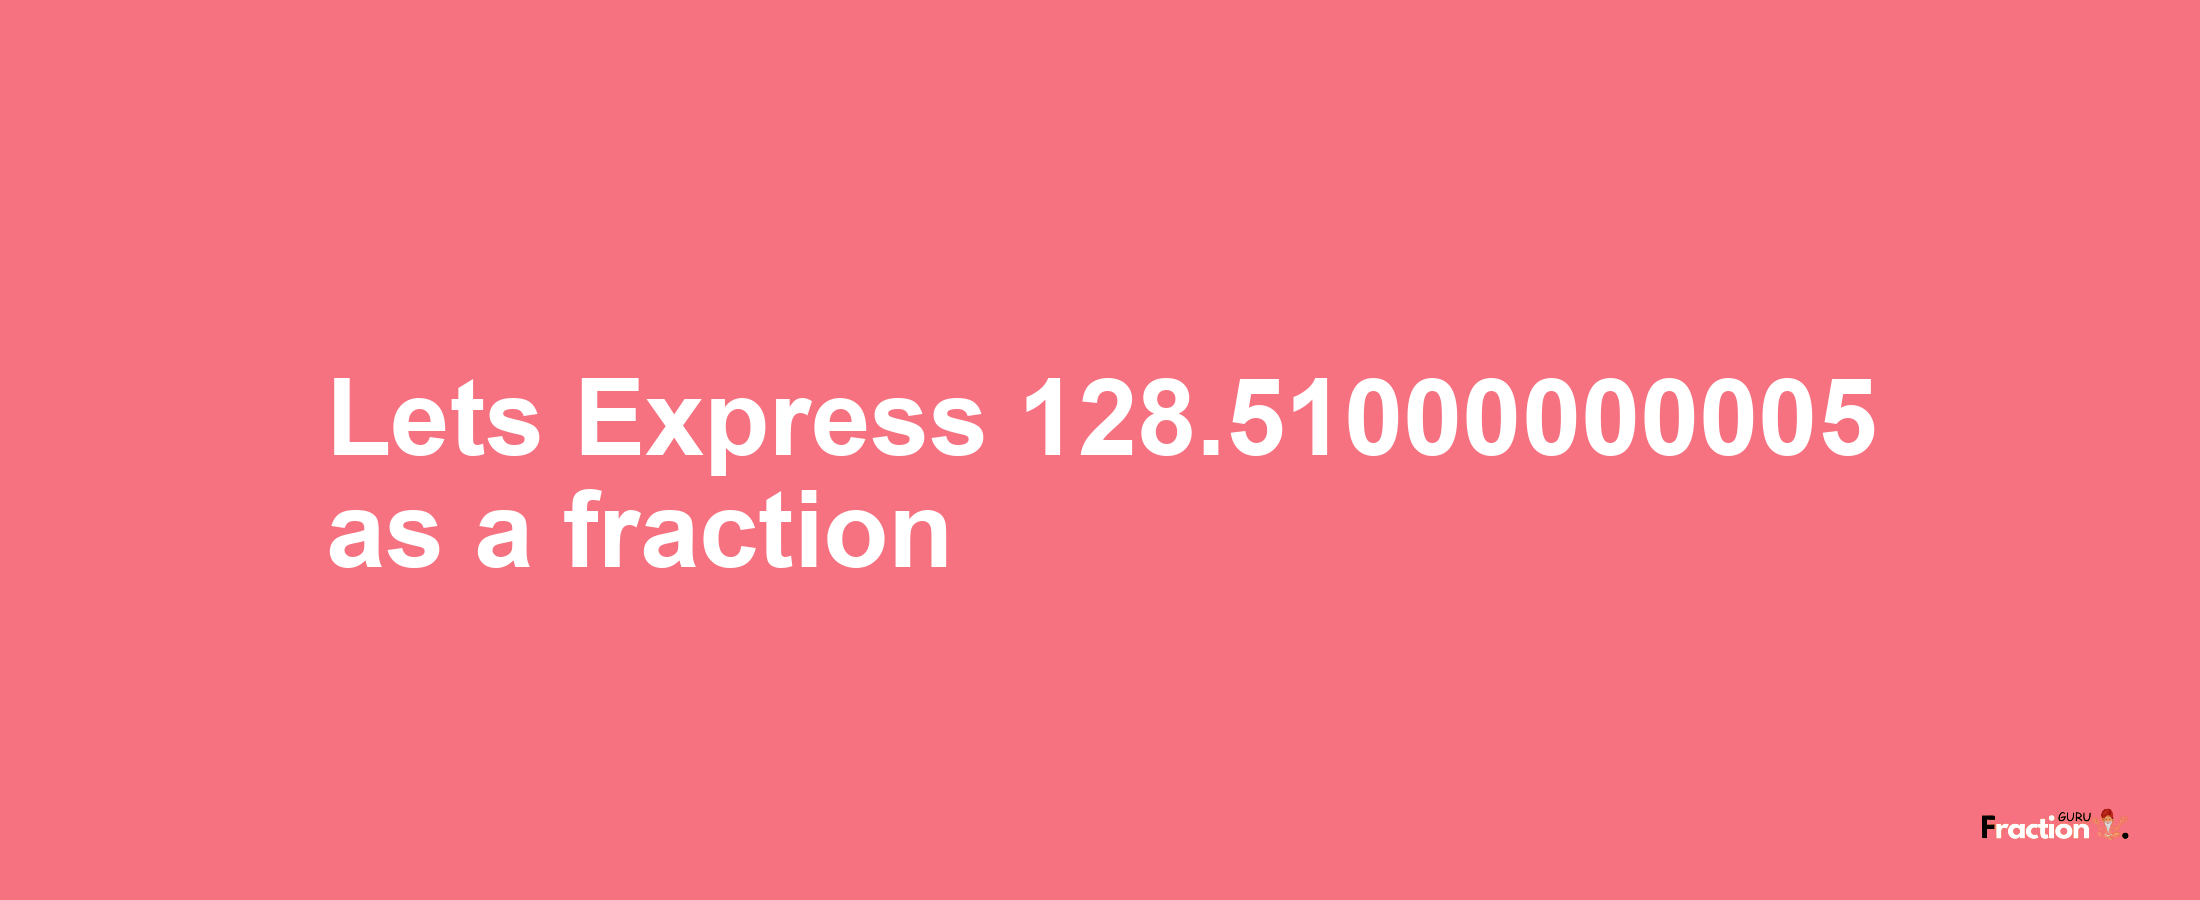 Lets Express 128.51000000005 as afraction